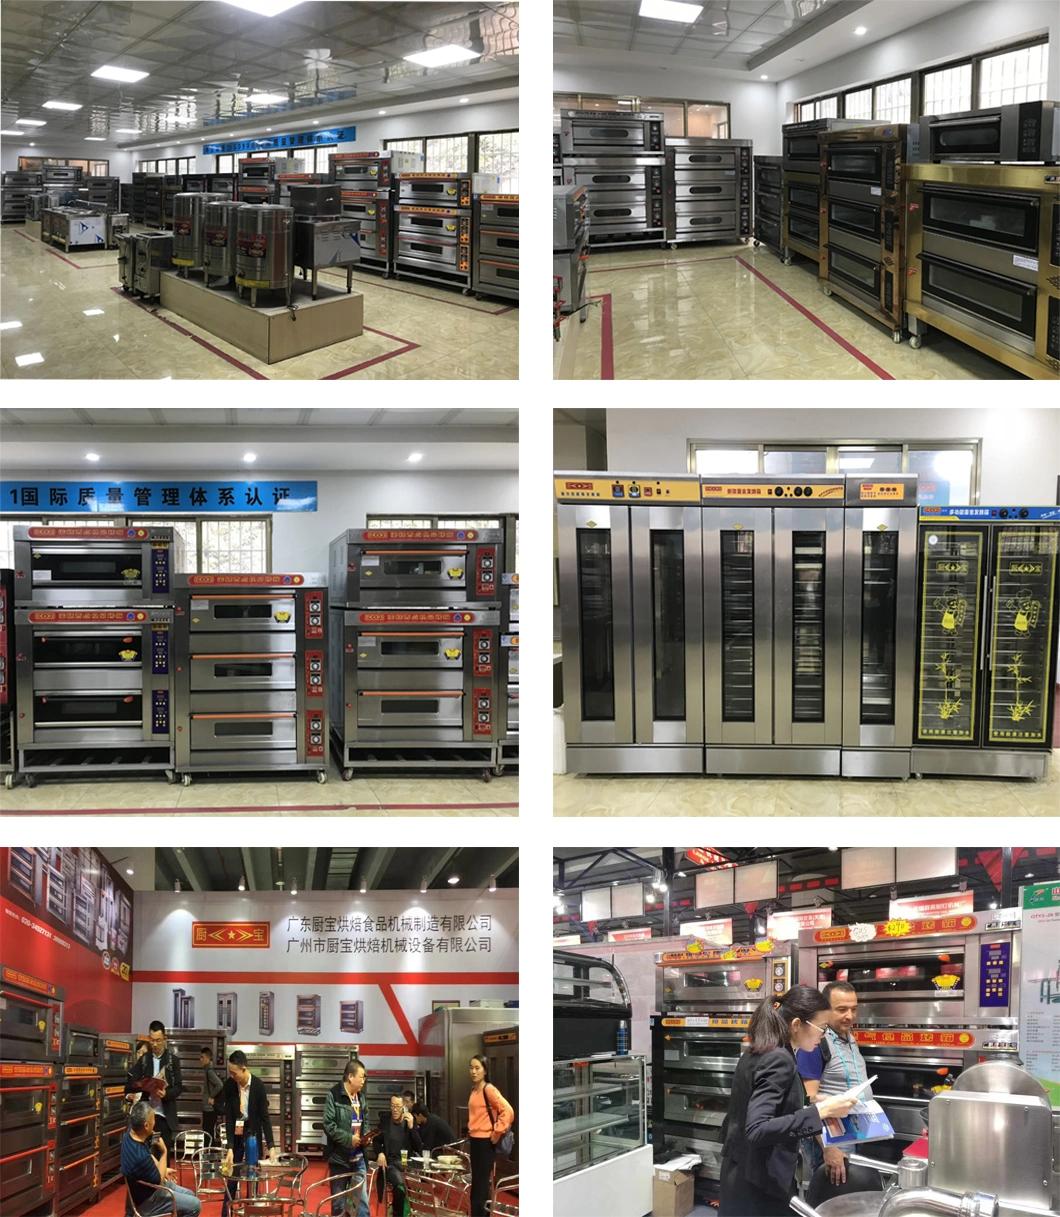 3 Deck 9 Trays Electirc Oven for Commercial Restaurant Kitchen Baking Equipment Bakery Machine Food Machinery